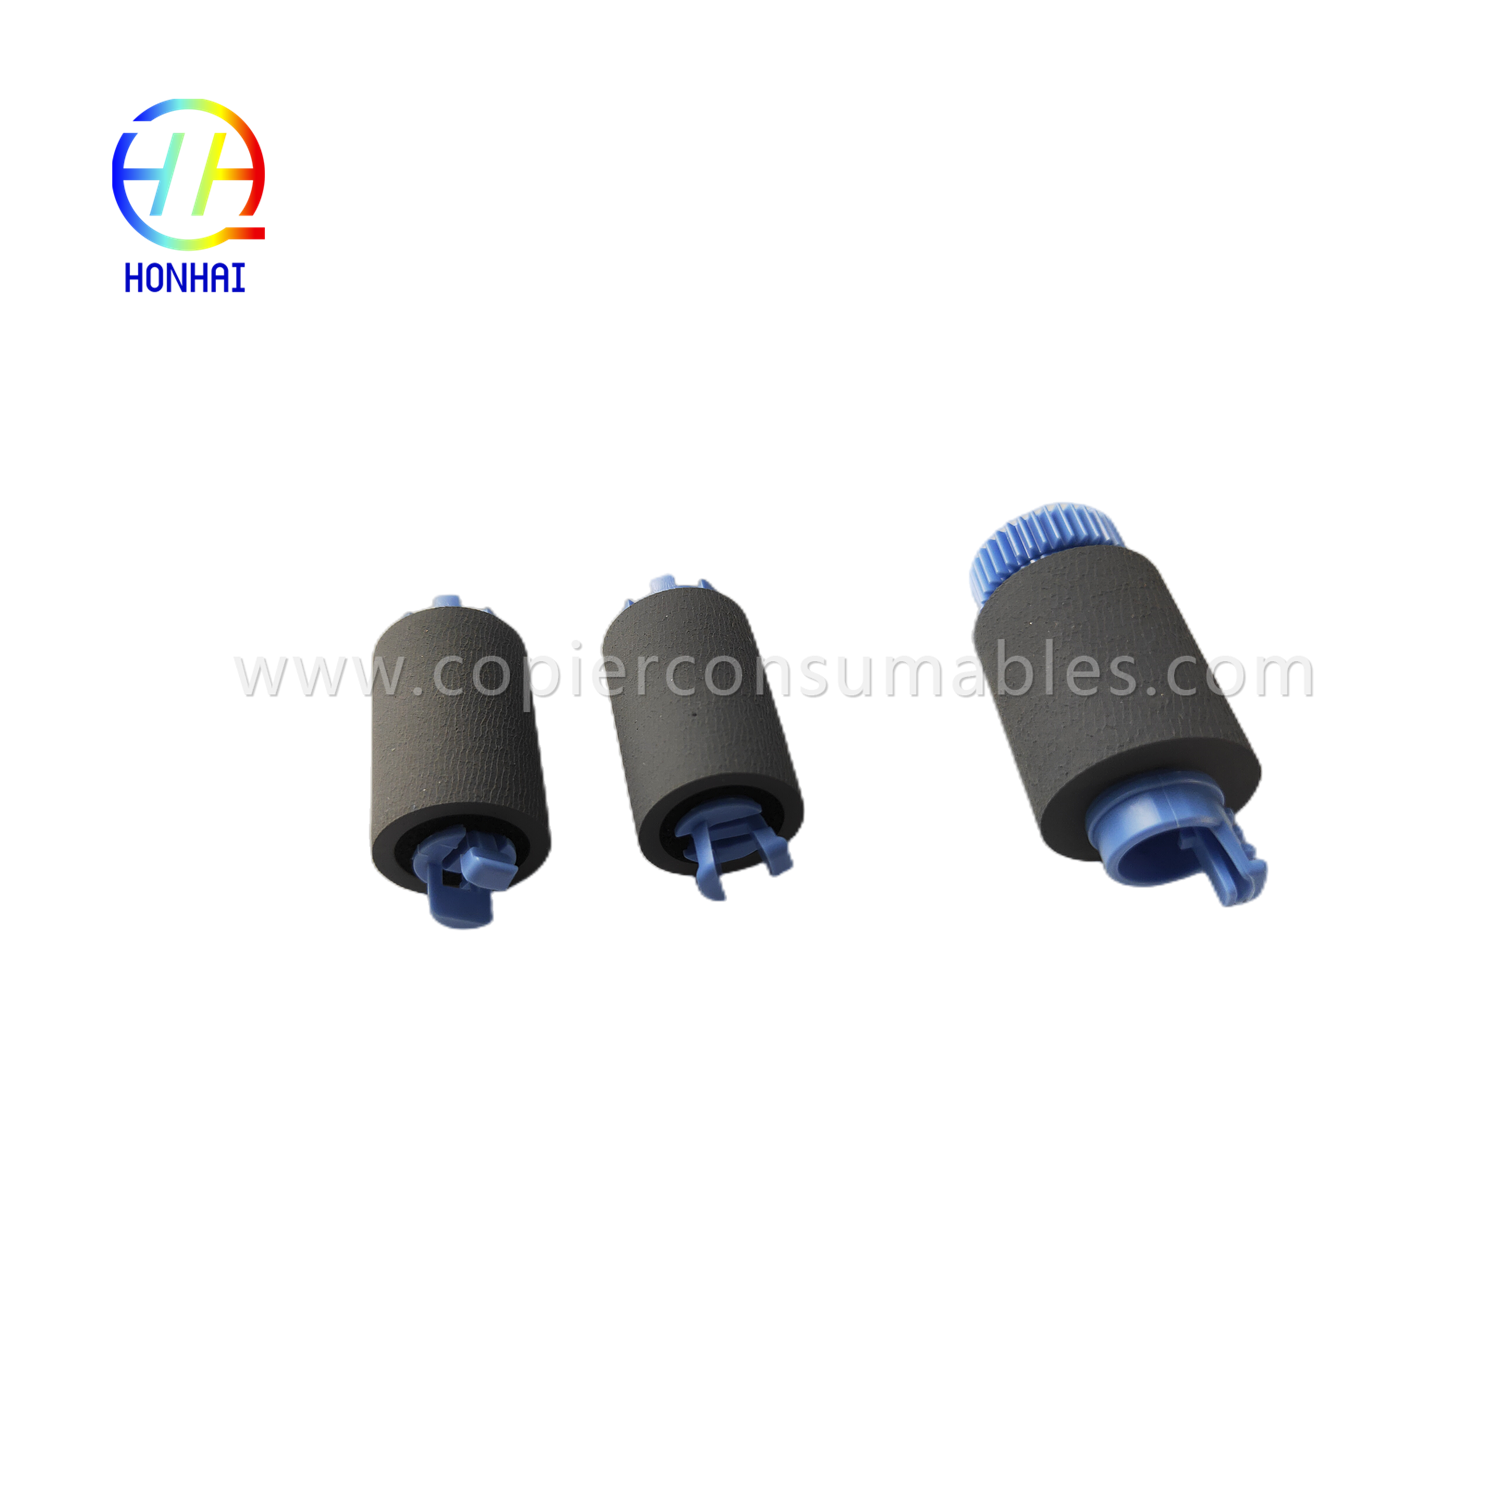 https://www.copierconsumables.com/tray-2-5-pickup-feed-separation-roller-set-for-hp-a7w93-67082-mfp-785f-780dn-e77650z-e77660z-e77650dn-dn-e767776 p77750z-p77760z-p75050dn-p75050dw-product/